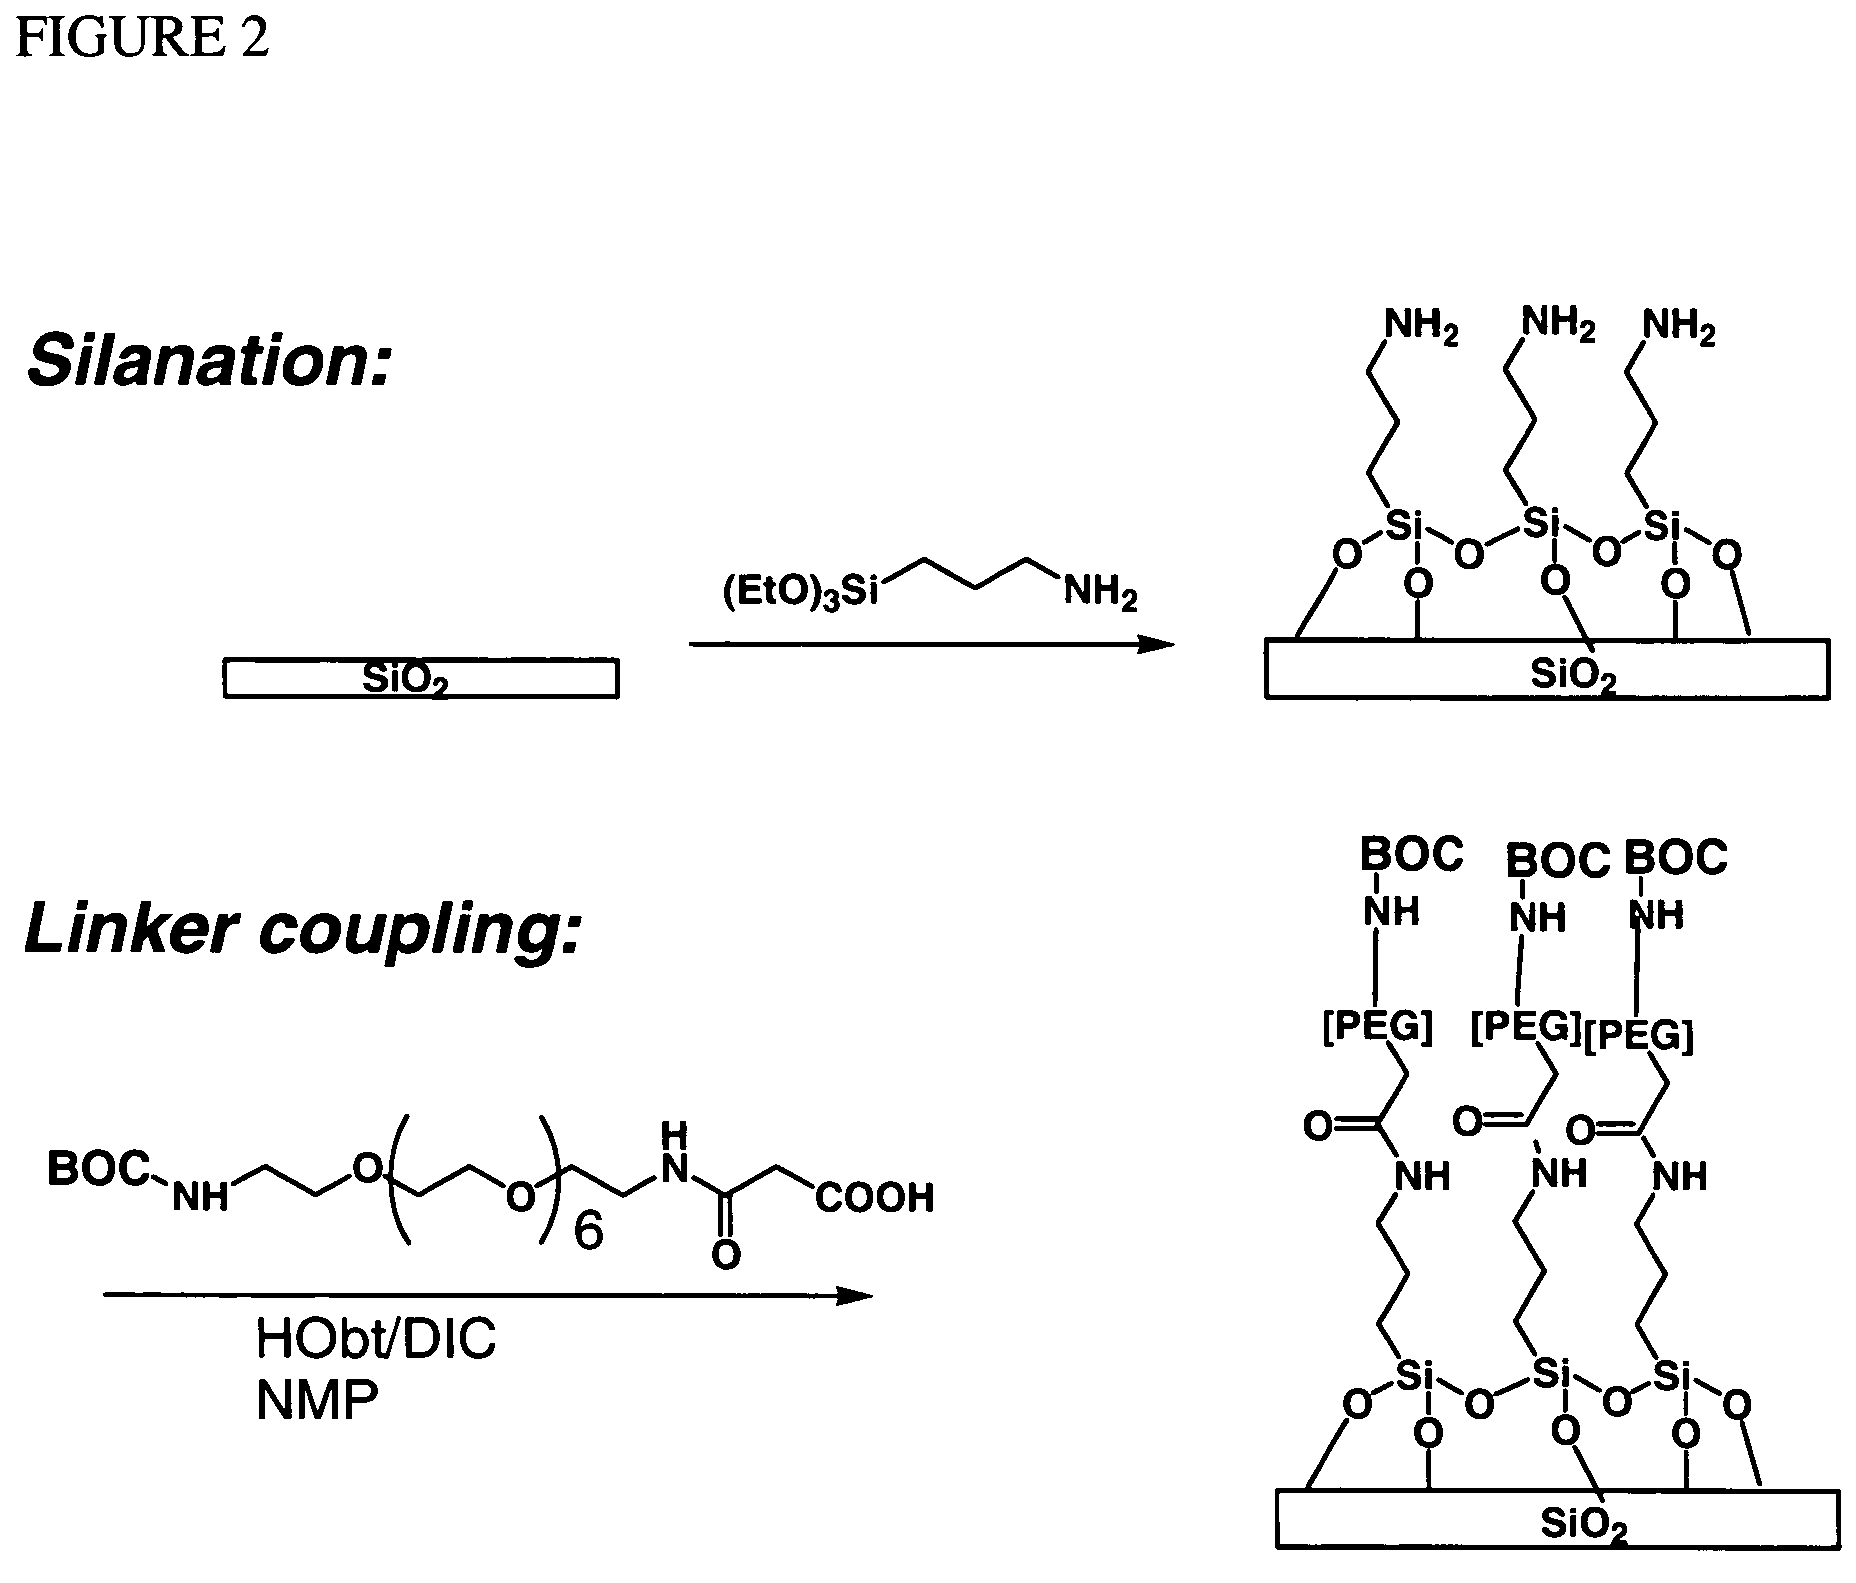 Molecular microarrays and helical peptides